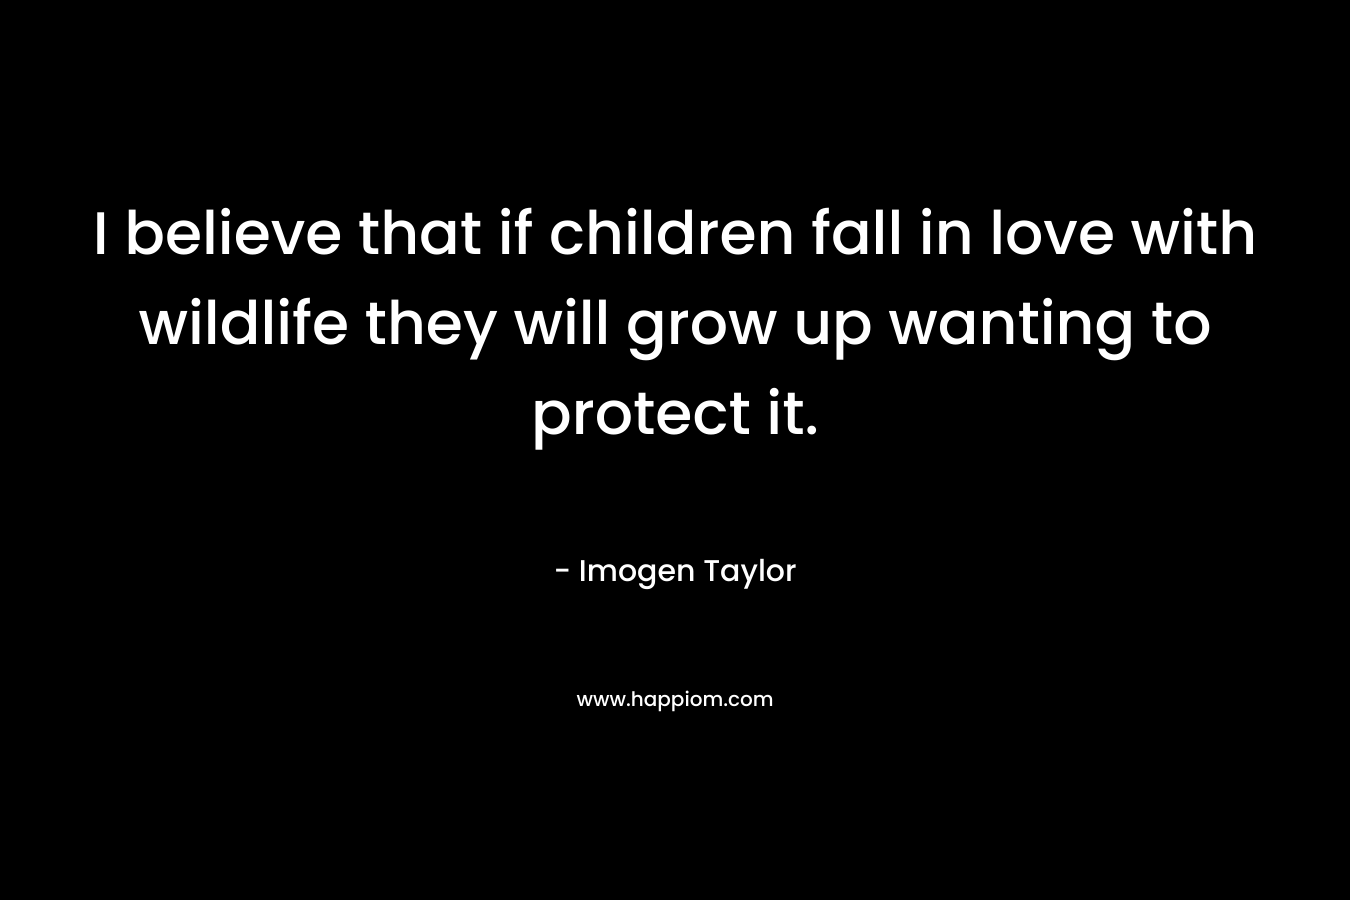 I believe that if children fall in love with wildlife they will grow up wanting to protect it.